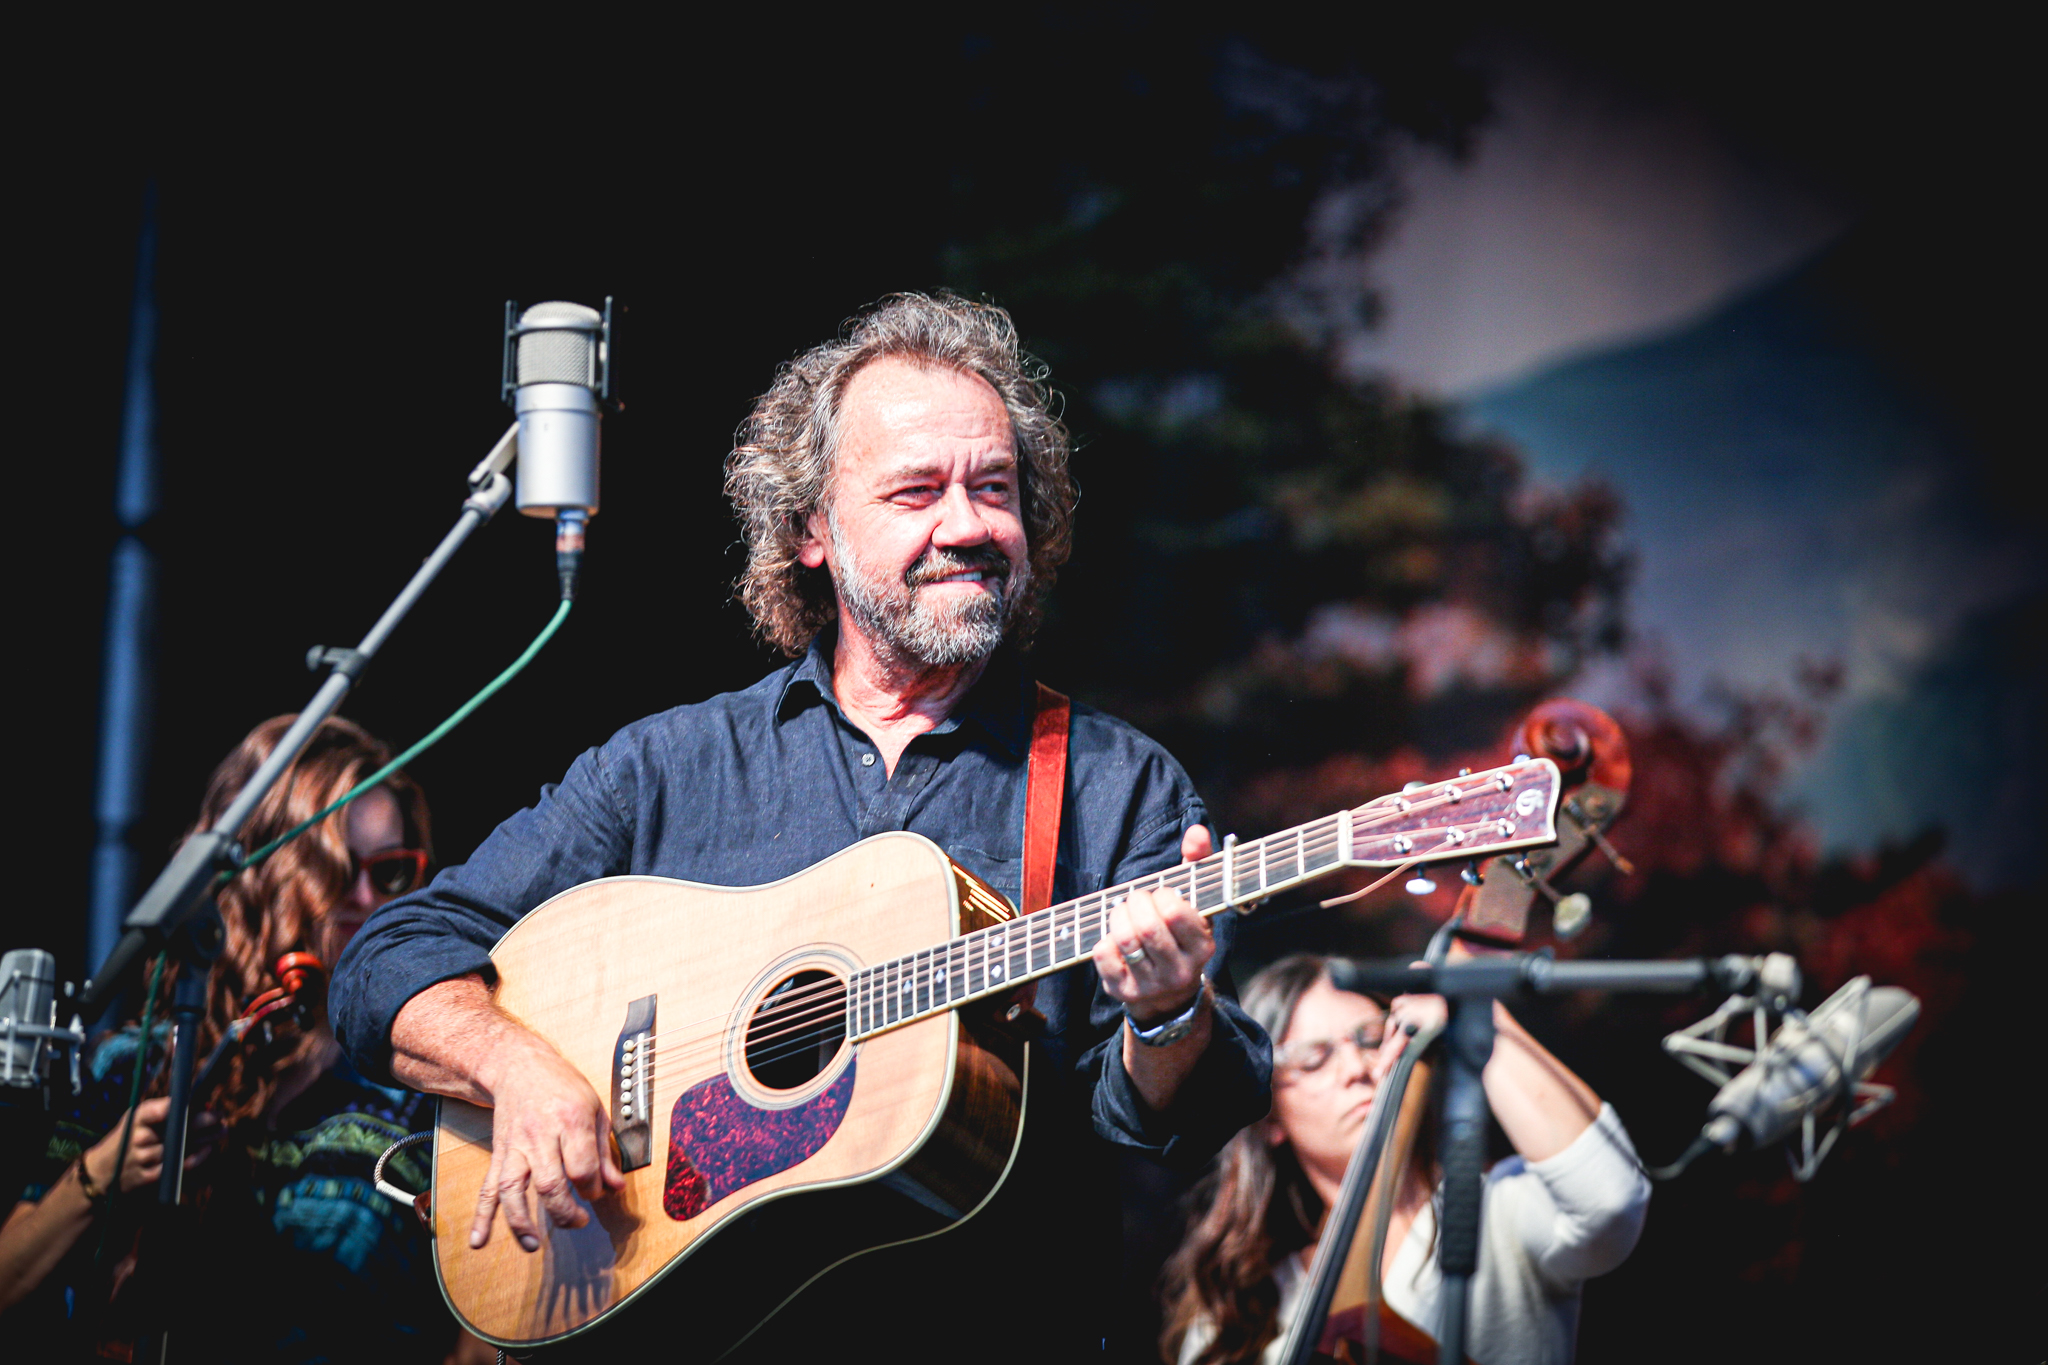 Dan Tyminski the former guitar player of Allison Krause and Union Station plays with his band at Blue Highway Festival. 